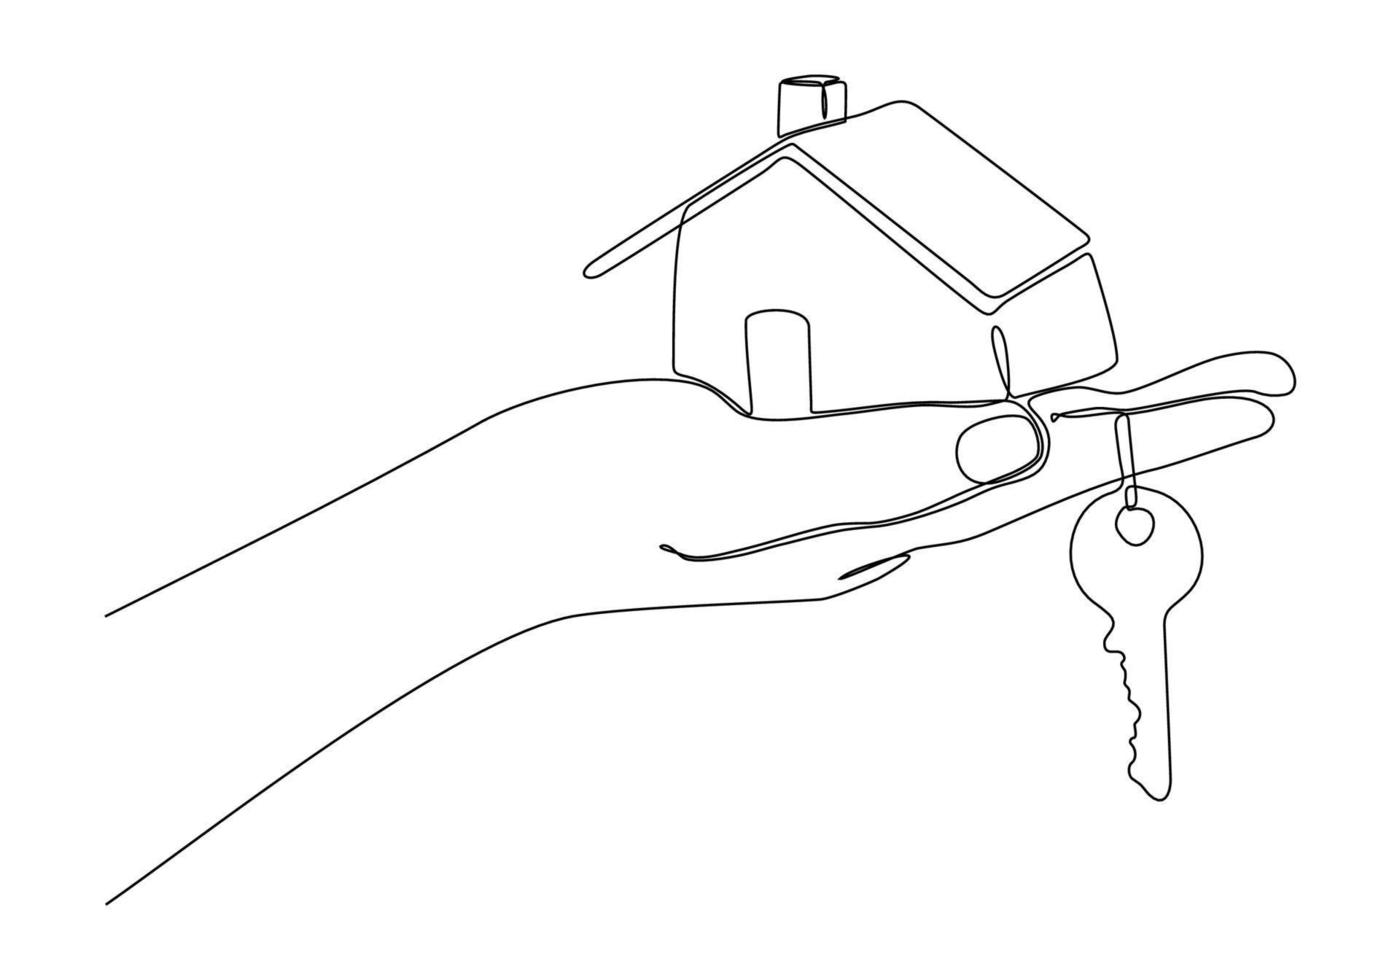 Art for Small Hands: Drawing - Inside a Dwelling